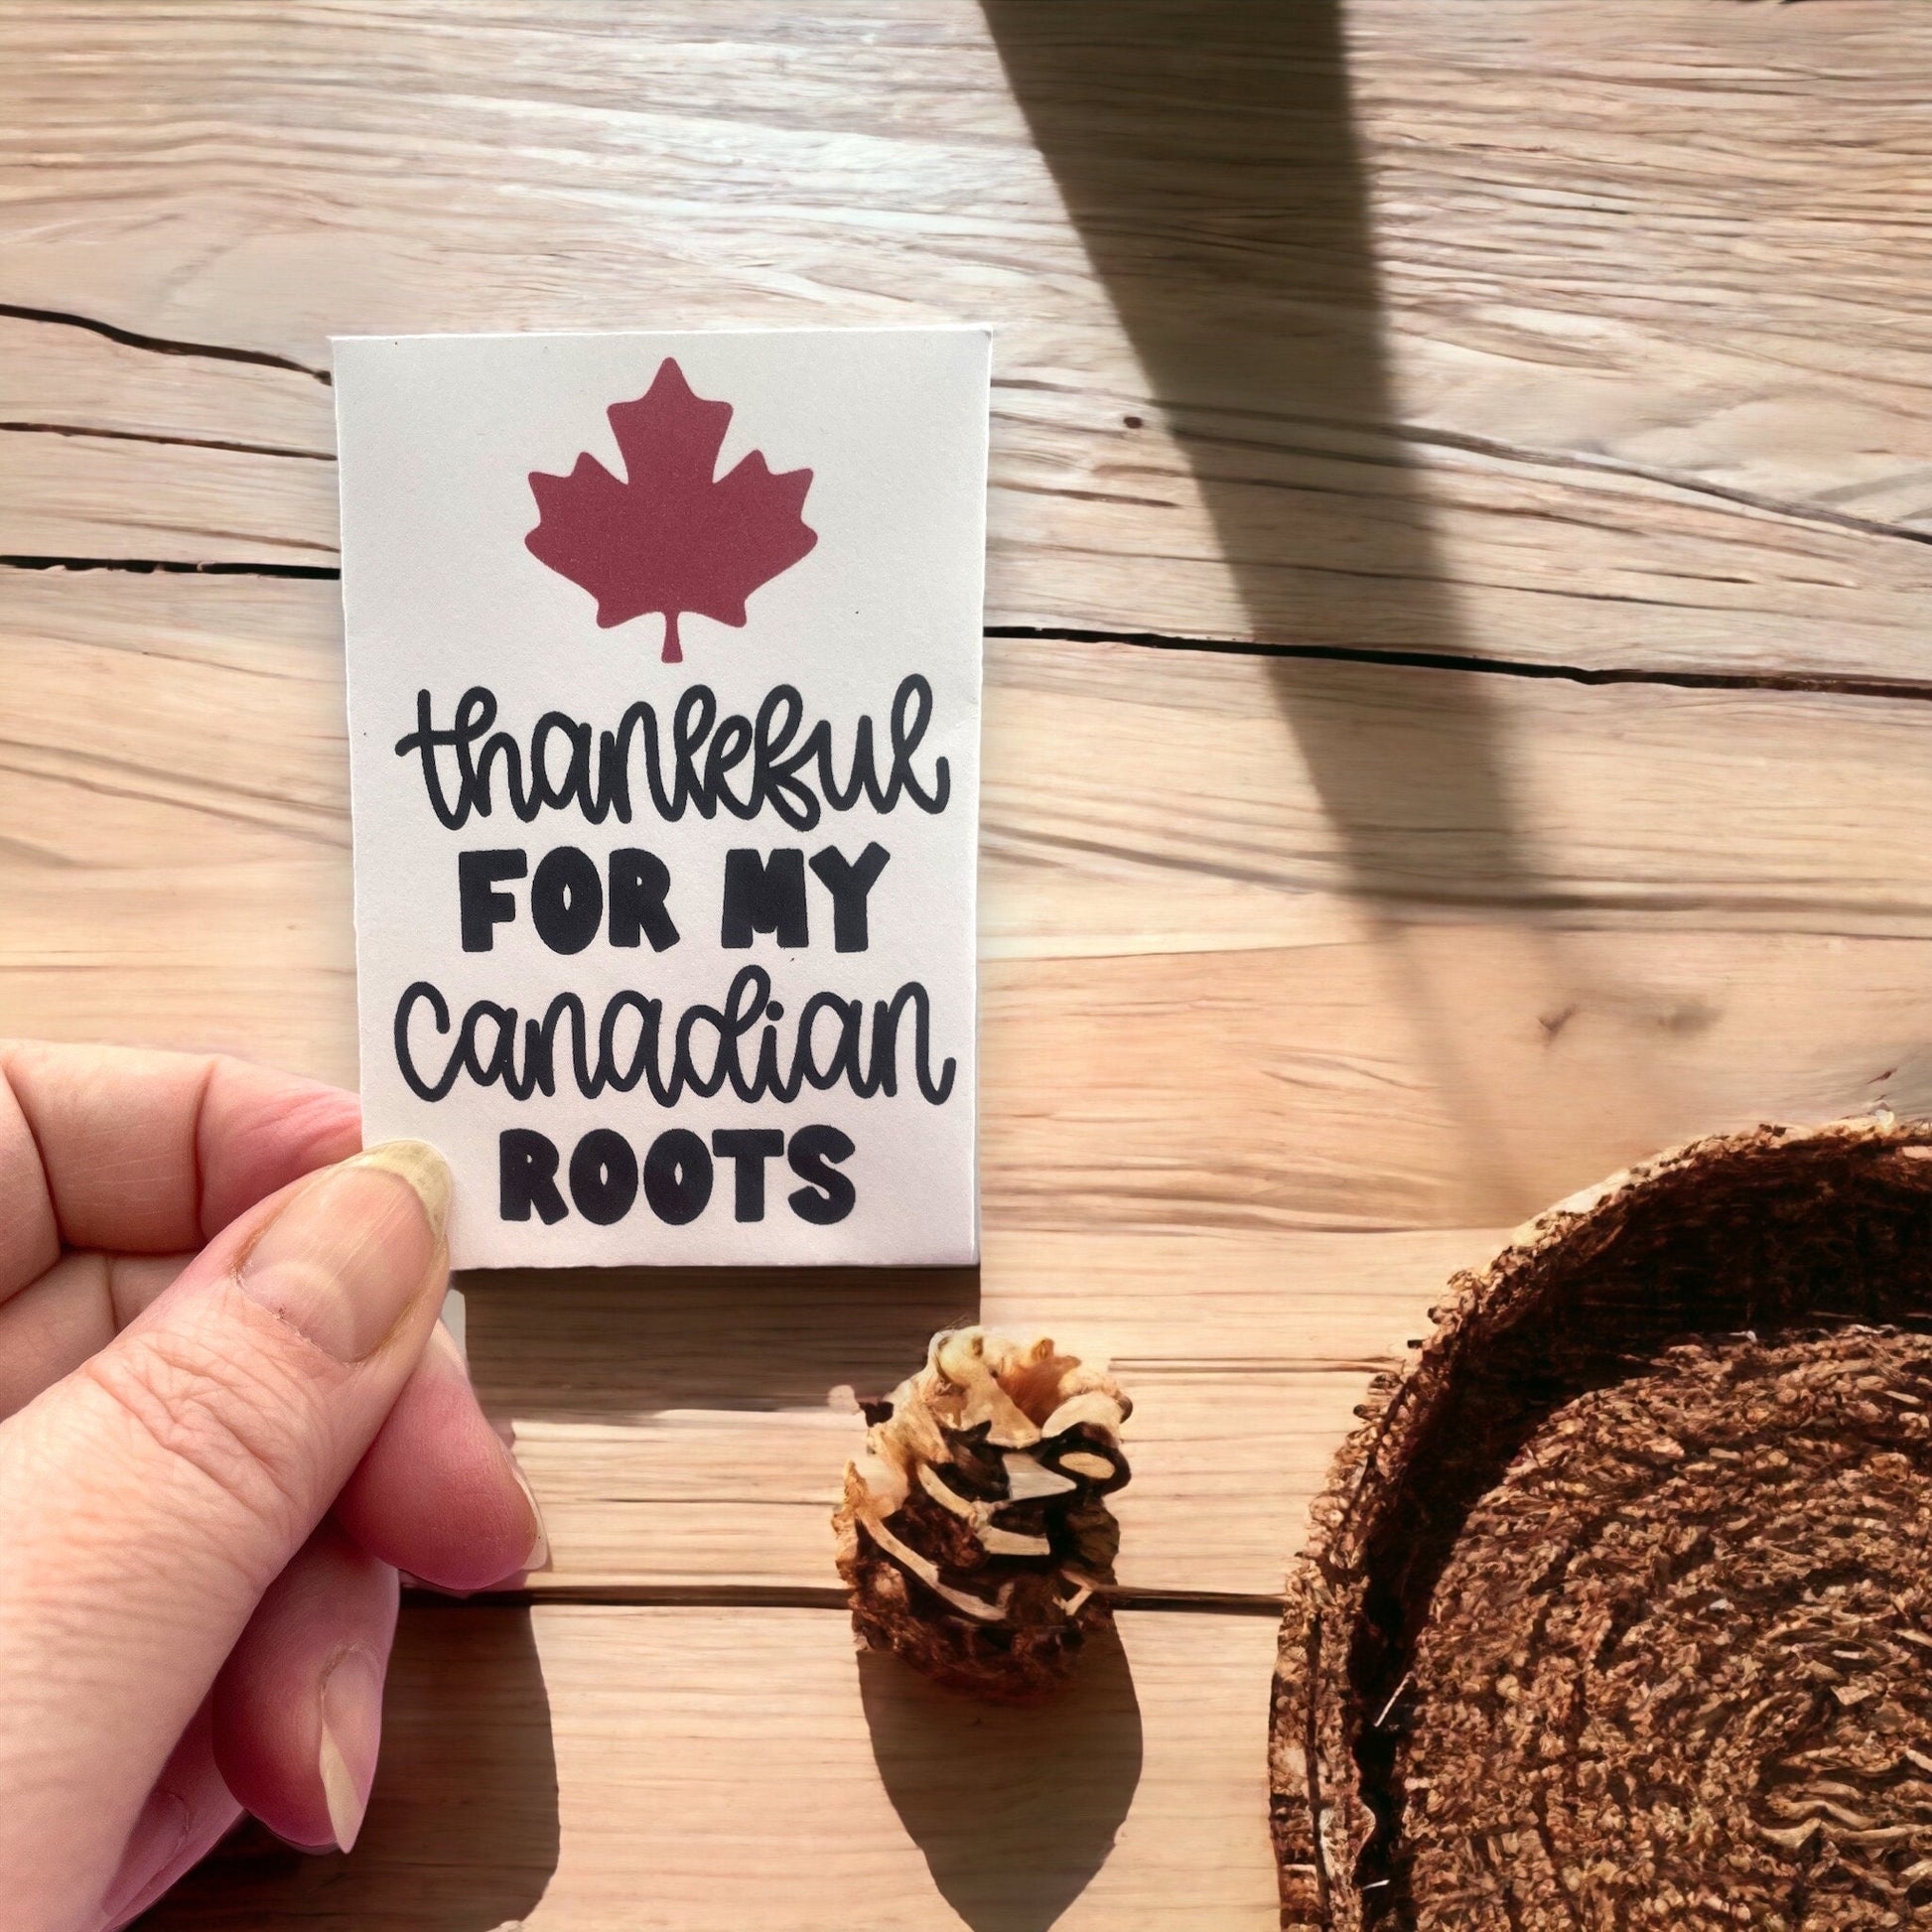 Seed Packages - Canada Day themed - July 1st, 2023 - Includes 10 Packages of Wildflowers Seeds